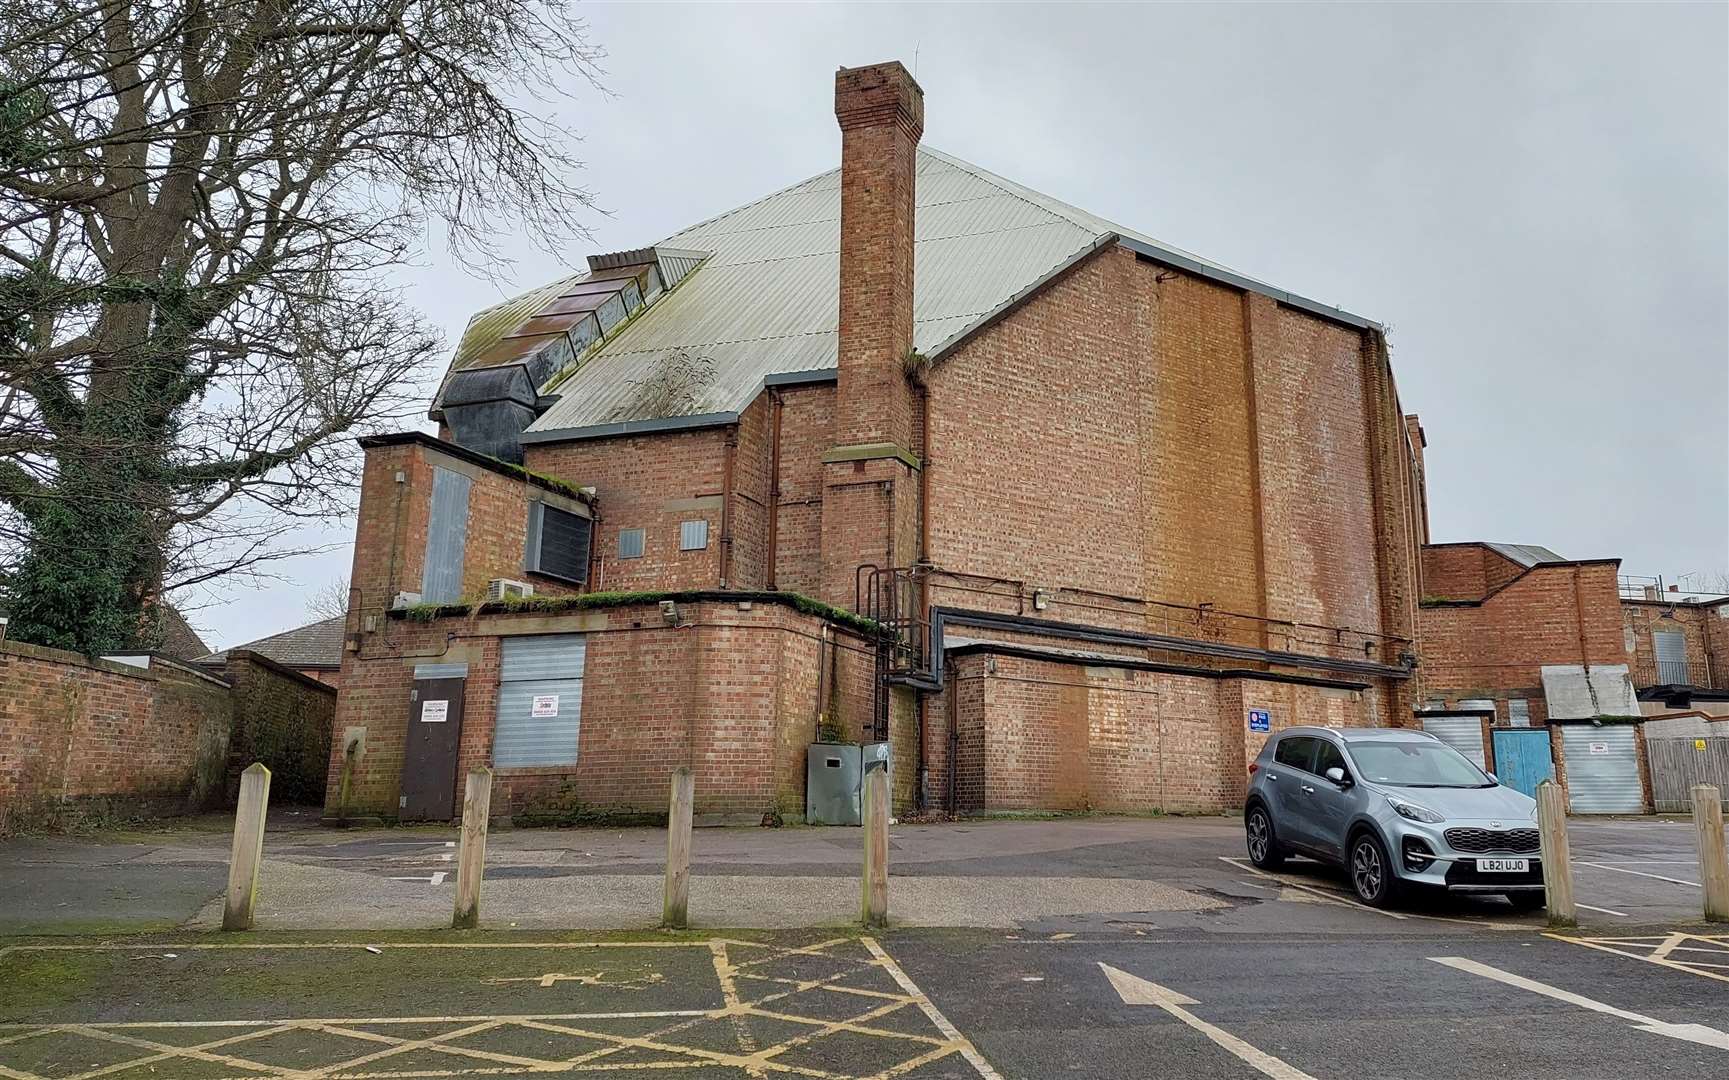 The rear of the former Mecca Bingo hall will be flattened if the plans go ahead